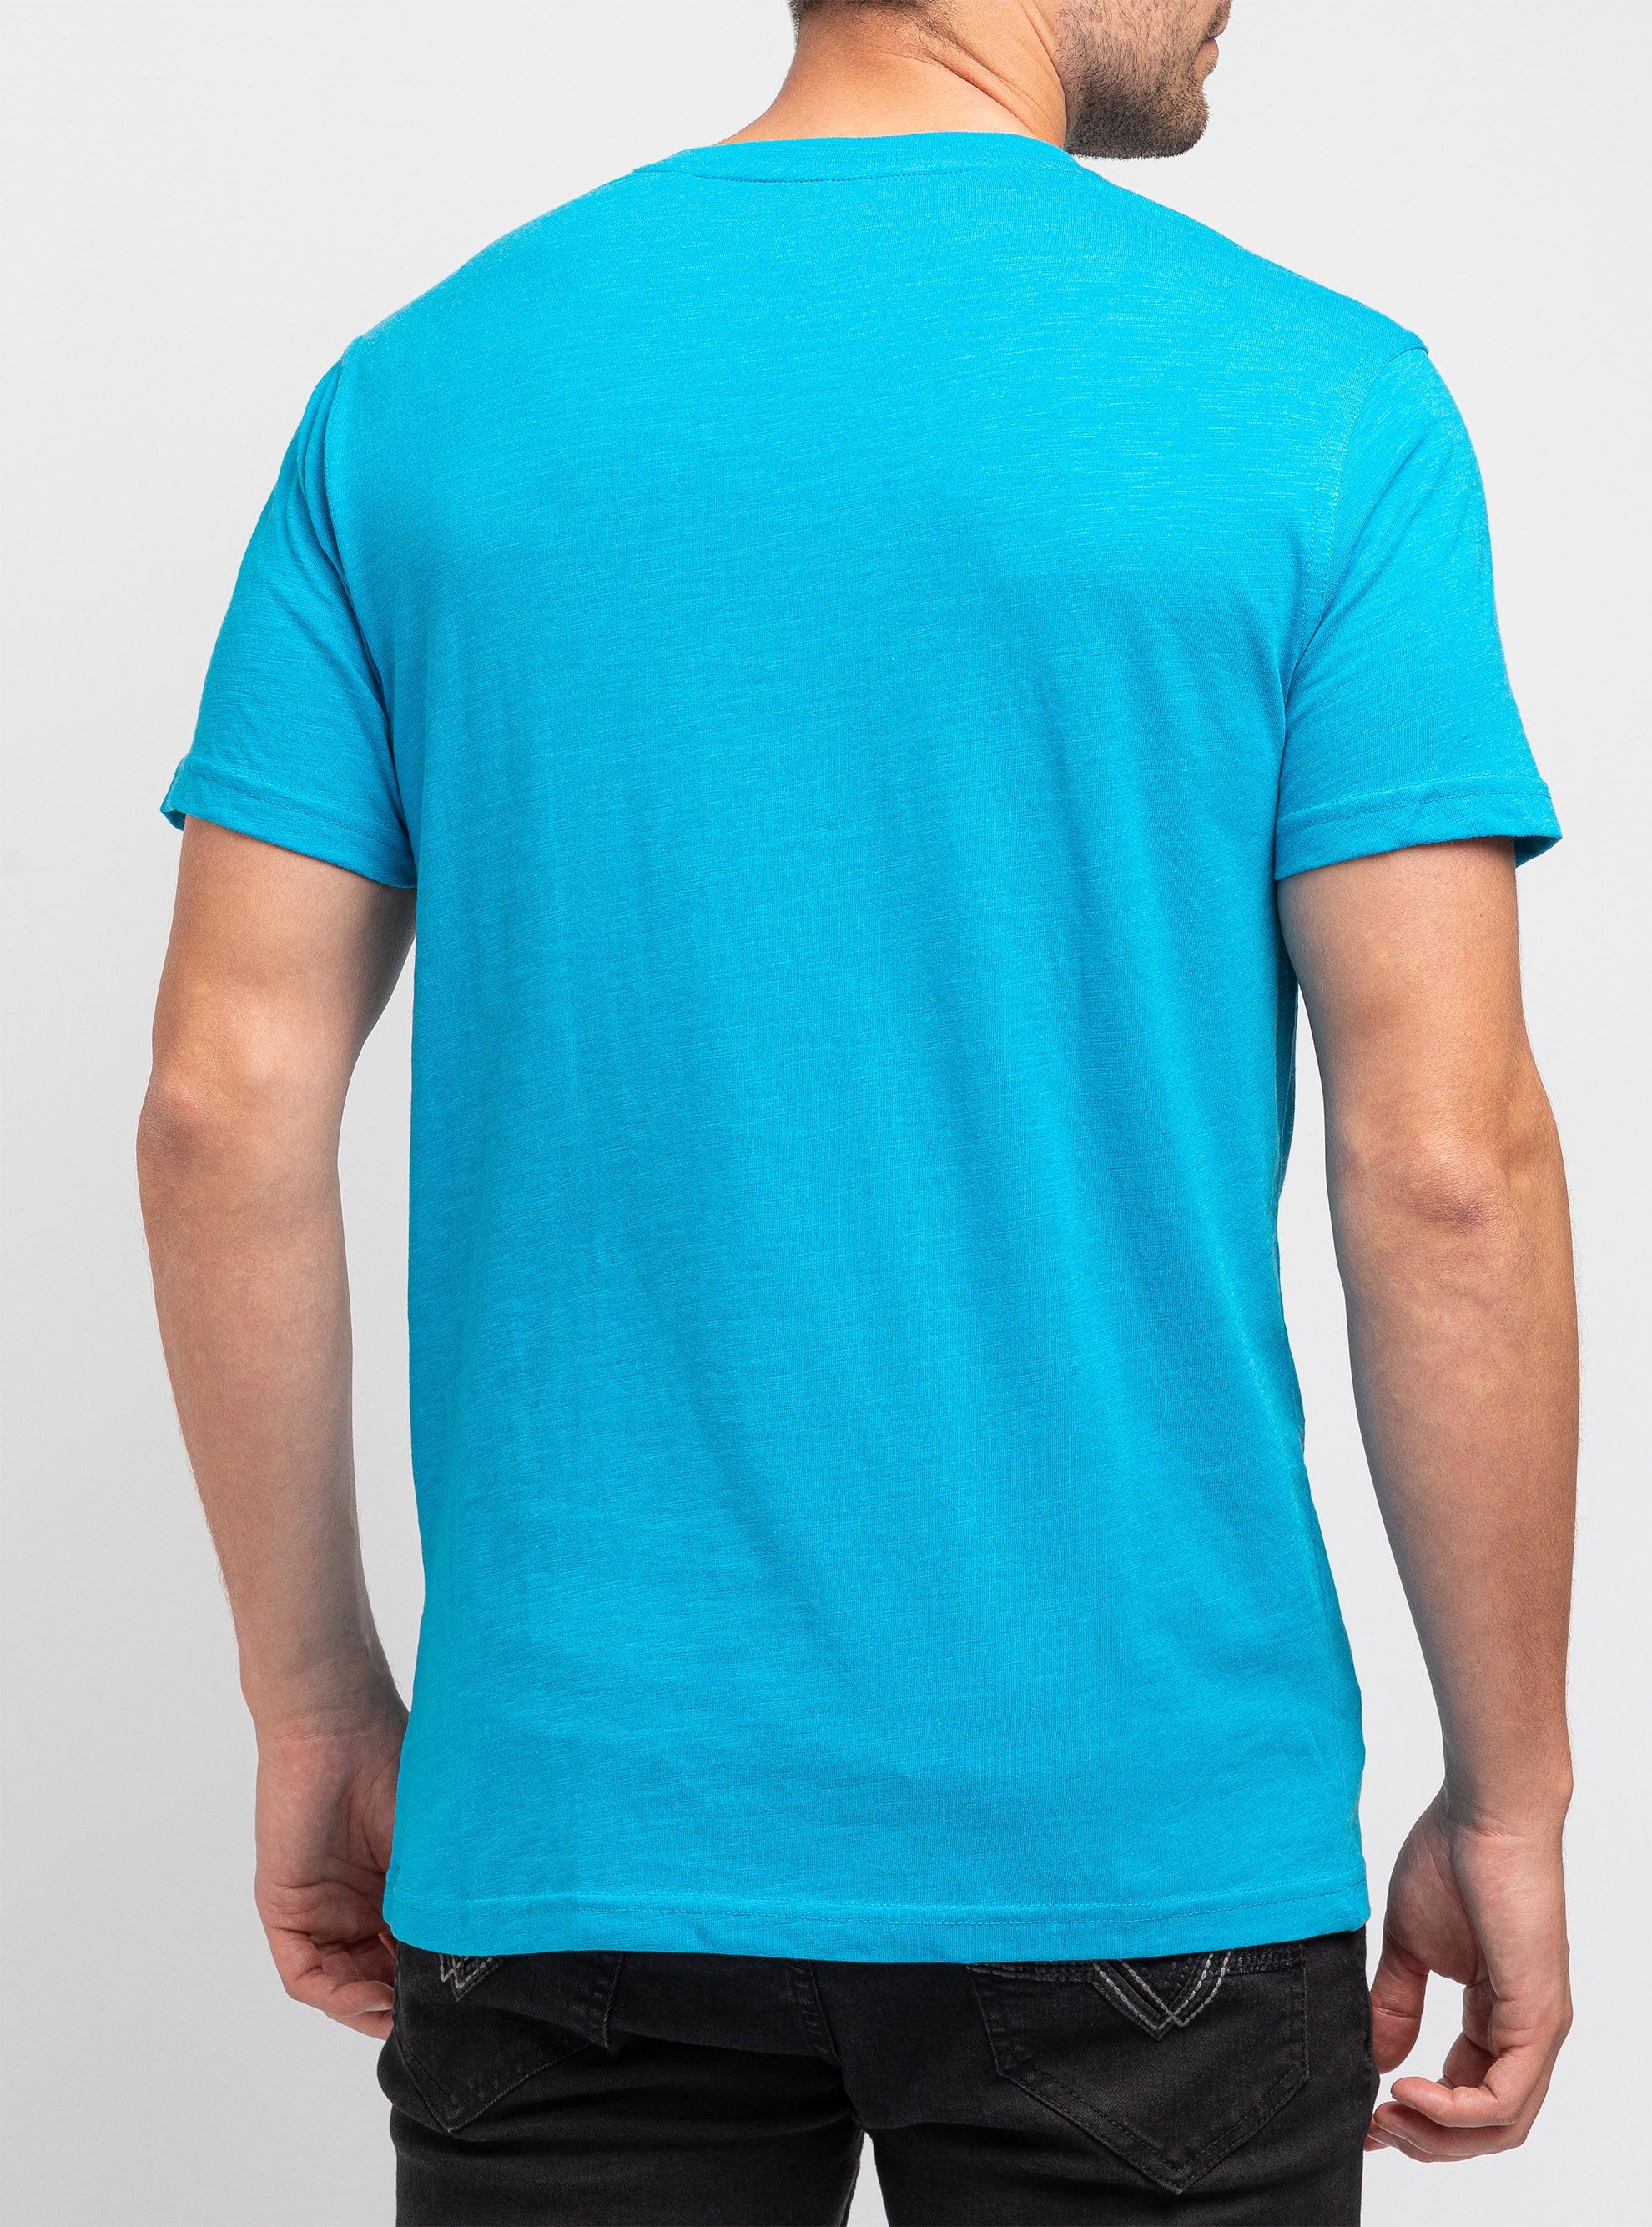 Teal essential t-shirt